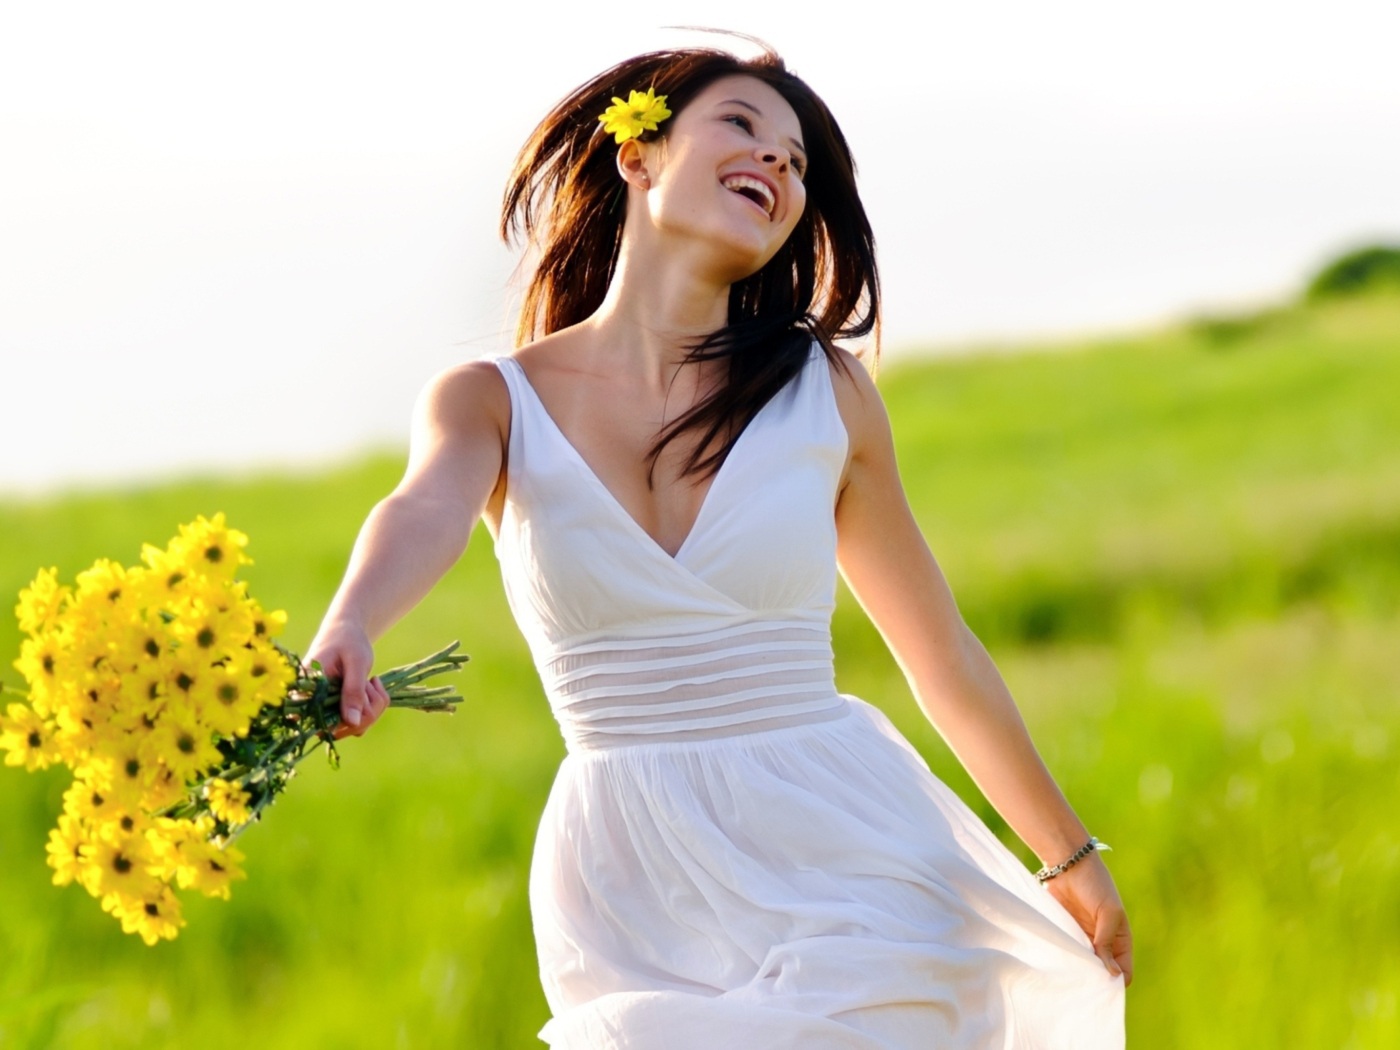 Happy Girl With Yellow Flowers wallpaper 1400x1050